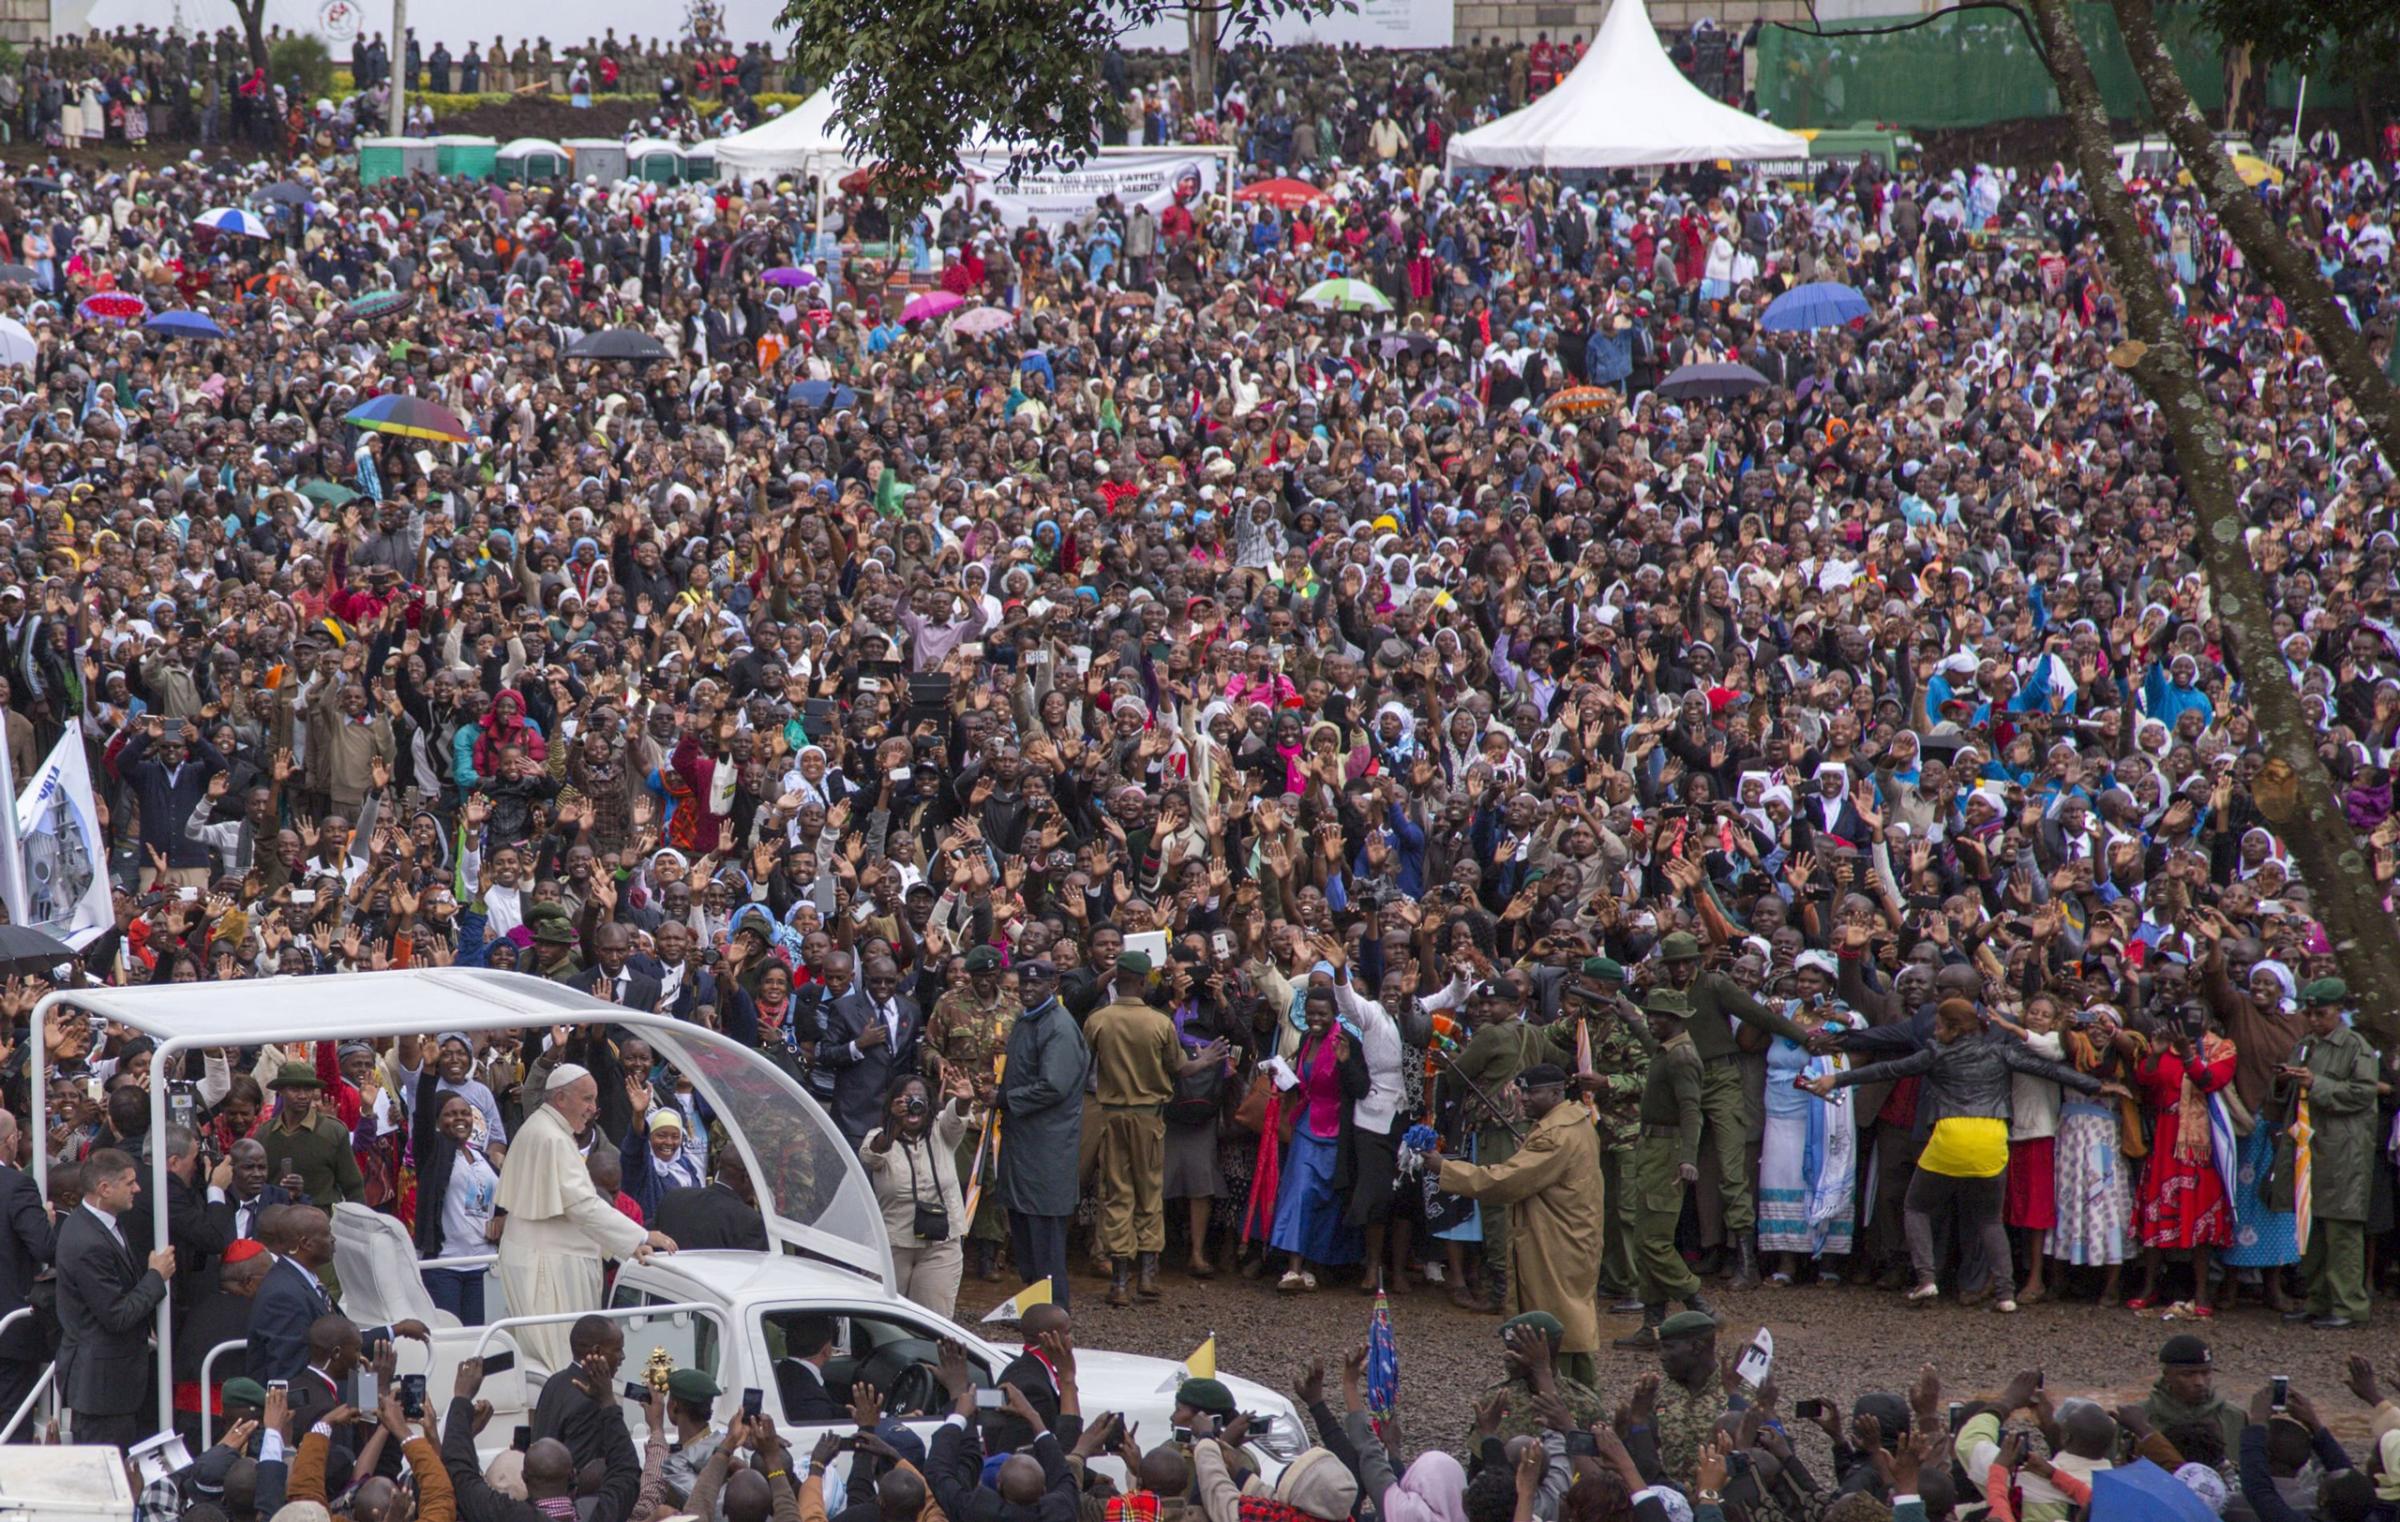 TOPSHOTS Pope Francis waves to the crowd at the University of Nairobi as he arrives to deliver an open-air mass on November 26, 2015. Pope Francis held his first open-air mass in Africa on November 26 with huge crowds calling heavy rains "God's blessing" as they sung and danced in the Kenyan capital. The 78-year-old pontiff, the third pope to visit the continent, is also scheduled to visit Uganda and the troubled Central African Republic (CAR) on a six-day trip. AFP PHOTO / GEORGINA GOODWINGeorgina Goodwin/AFP/Getty Images